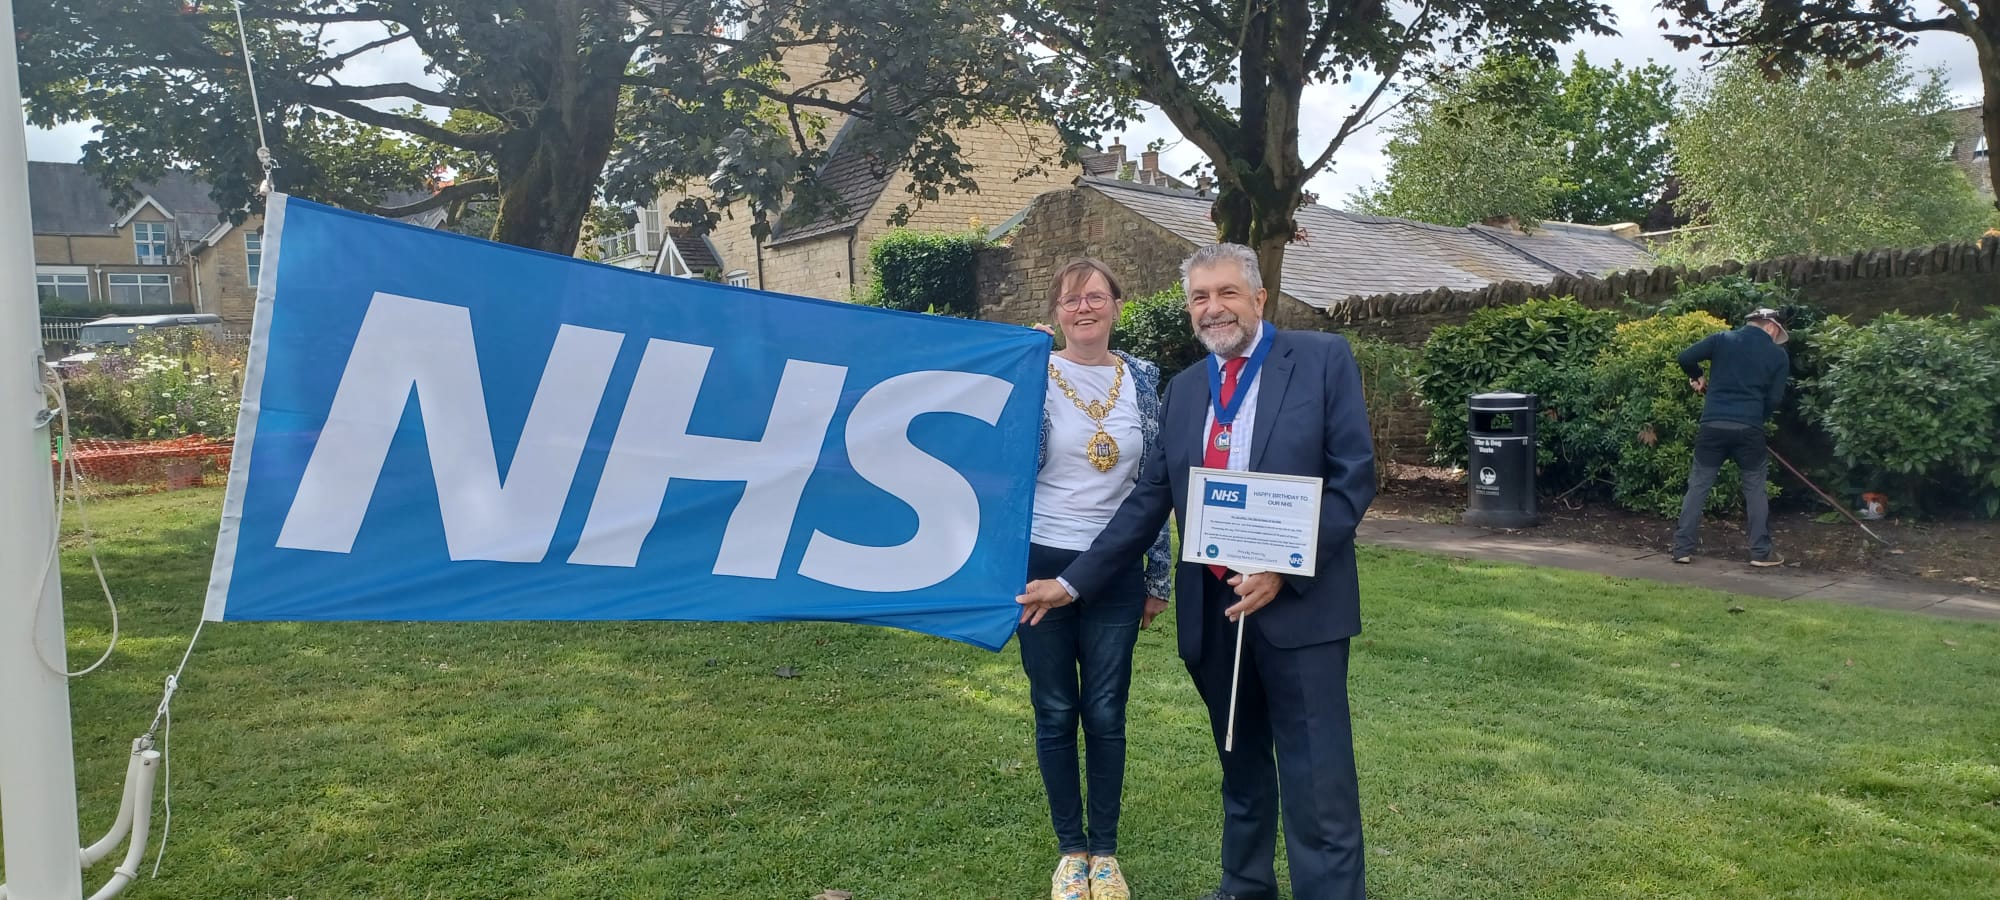 Cllrs Coleman and Akers holding the NHS flag